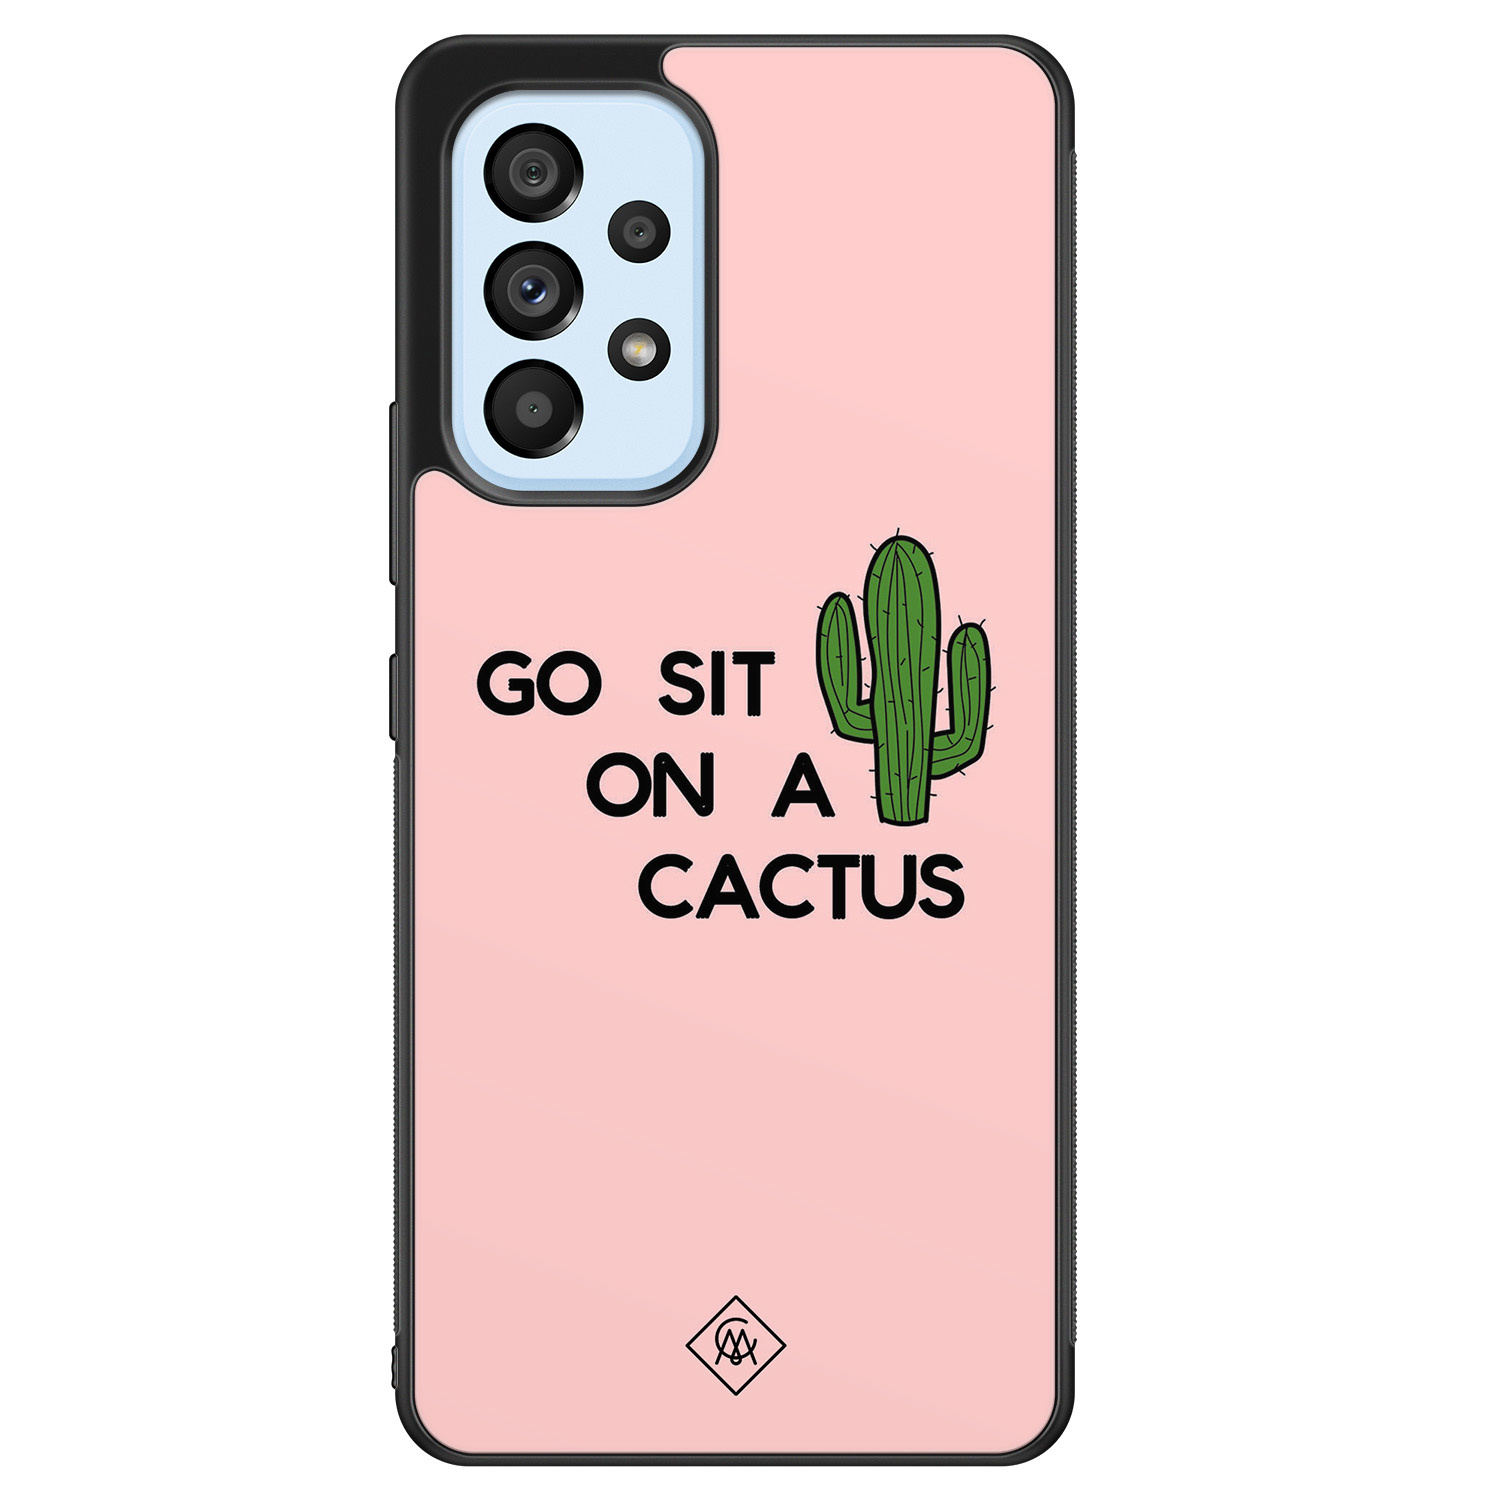 Samsung Galaxy A33 hoesje - Go sit on a cactus